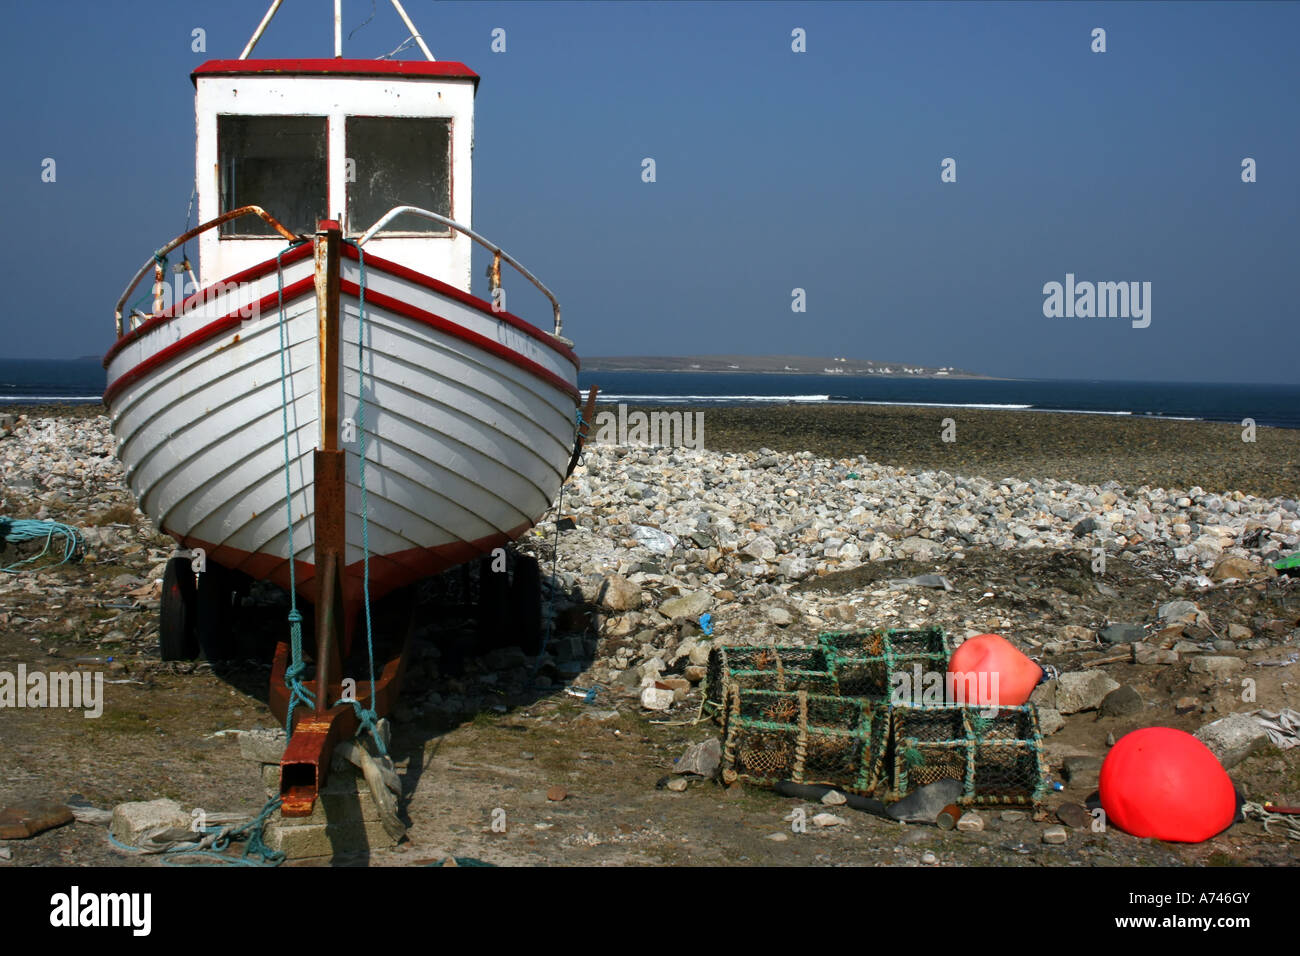 Fishing boat at Meenlaragh, County Donegal, Republic of Ireland Stock Photo